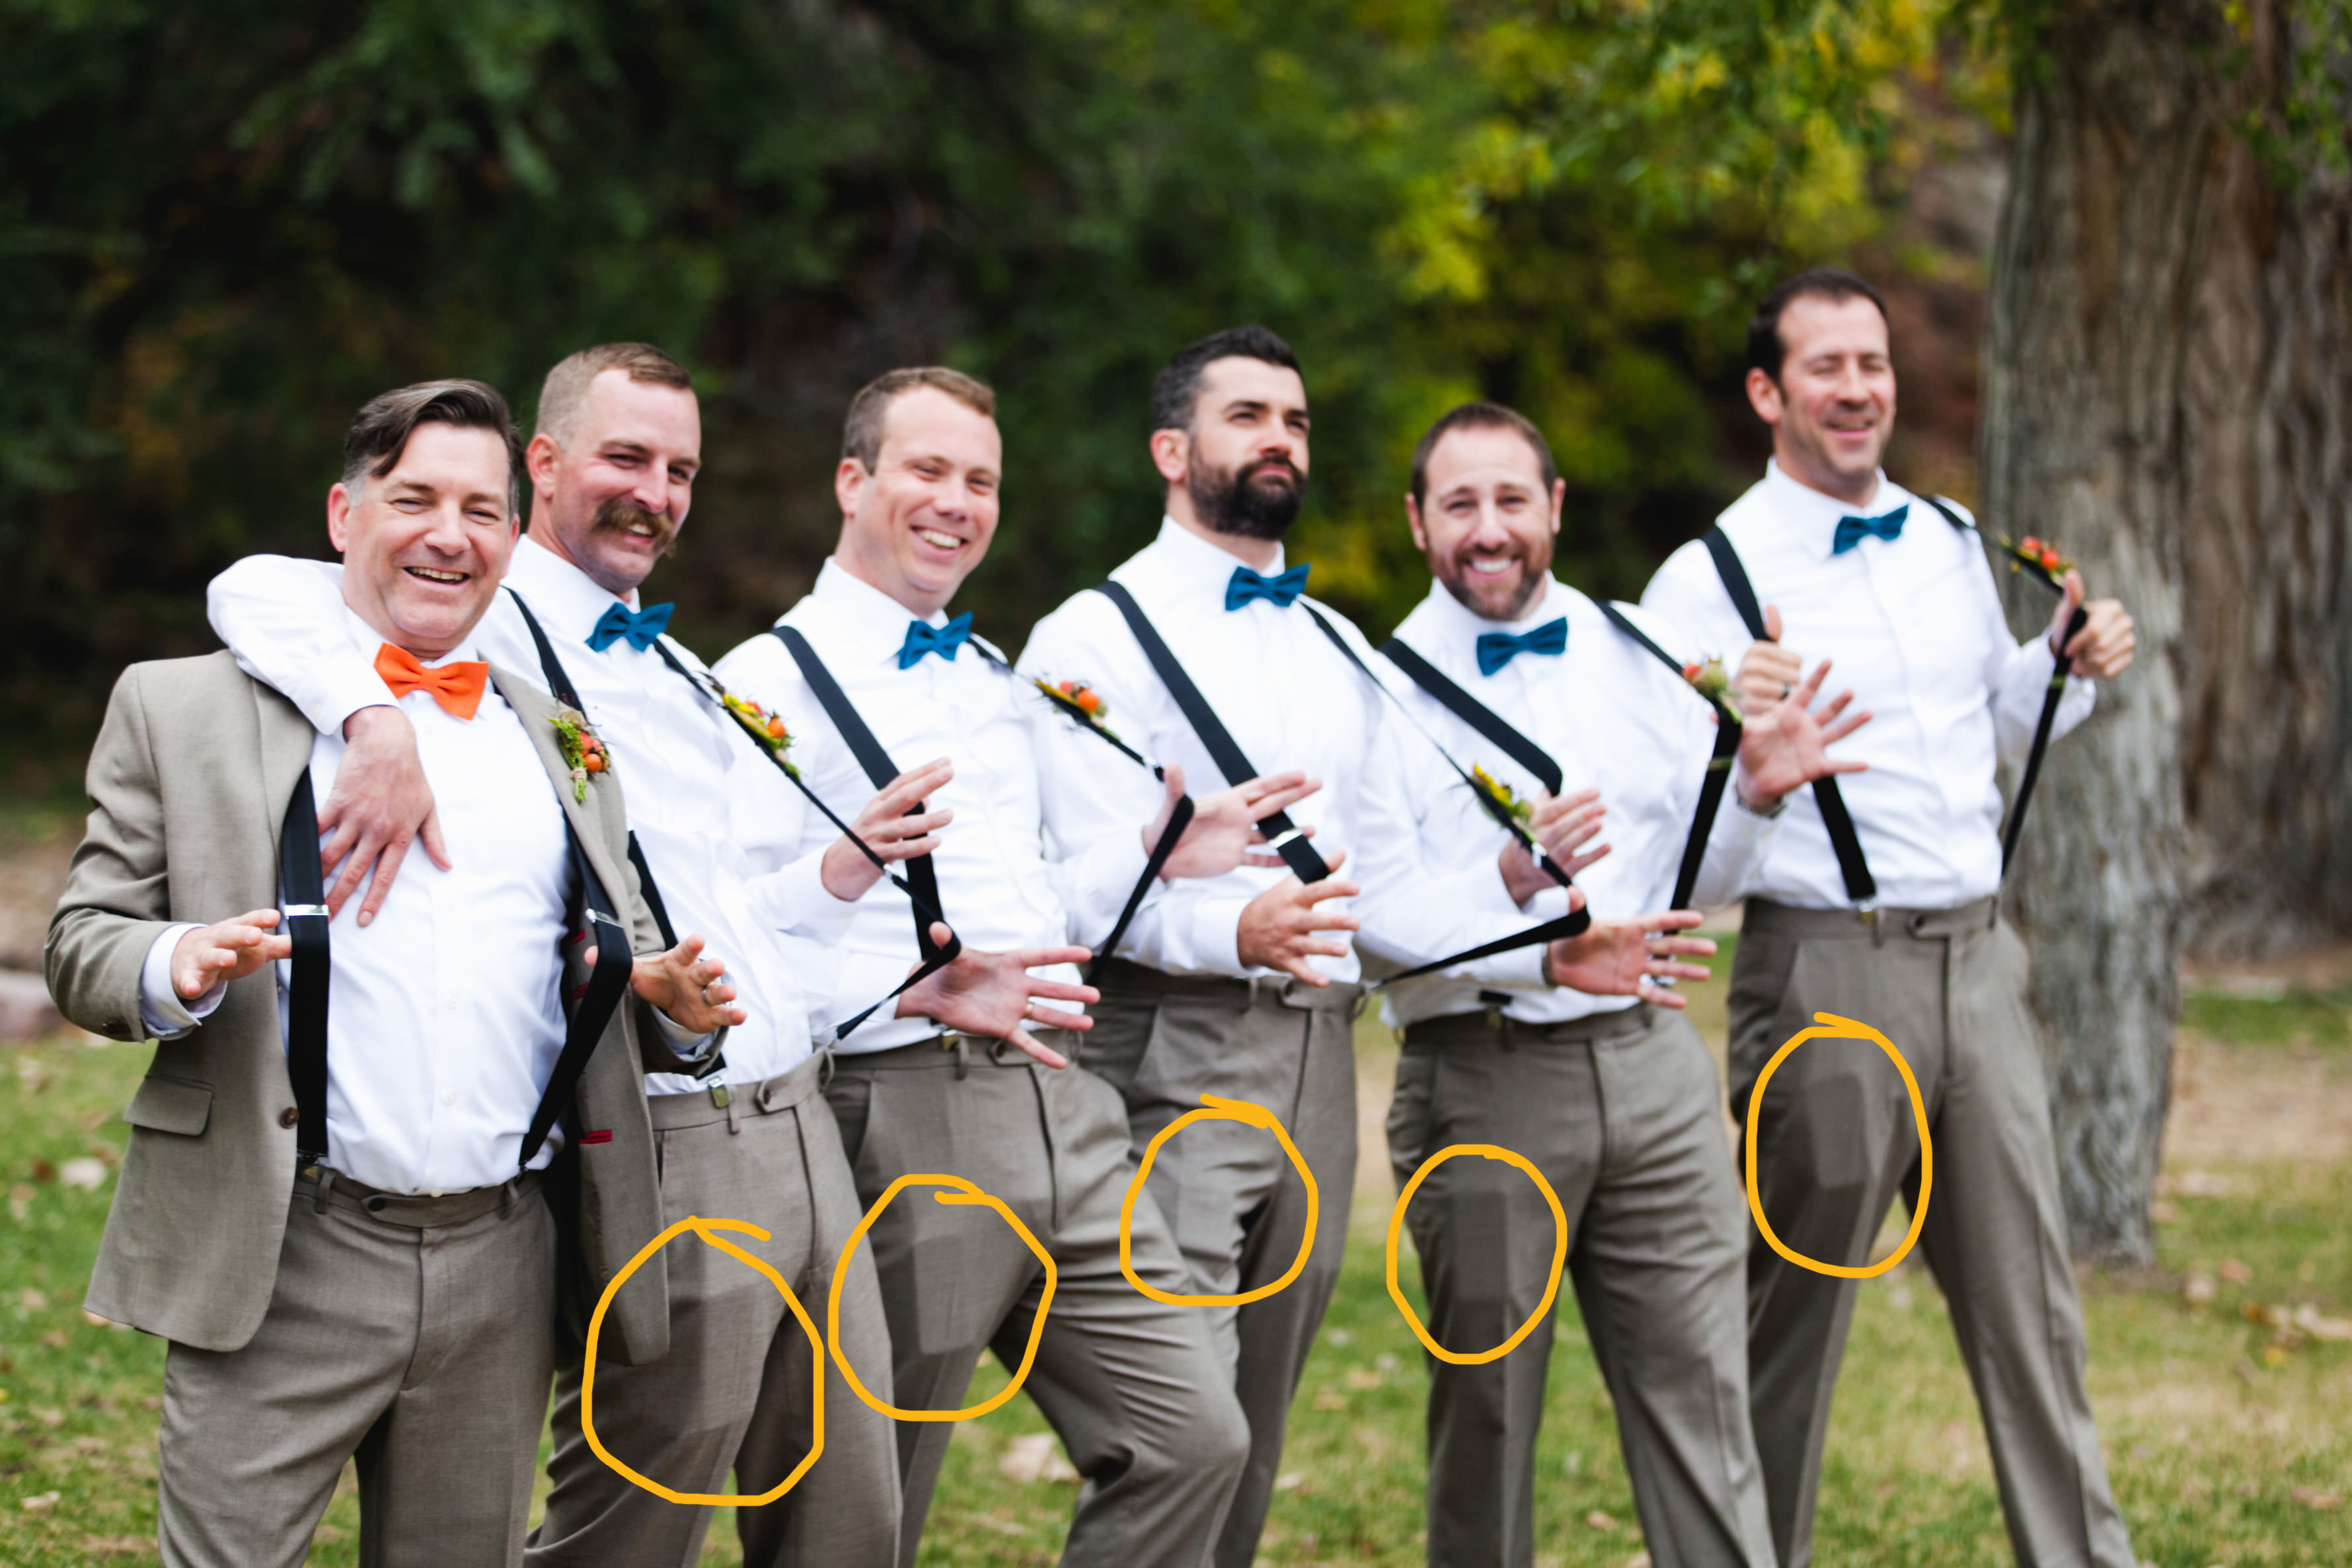 groomsmen with cell phones in pockets